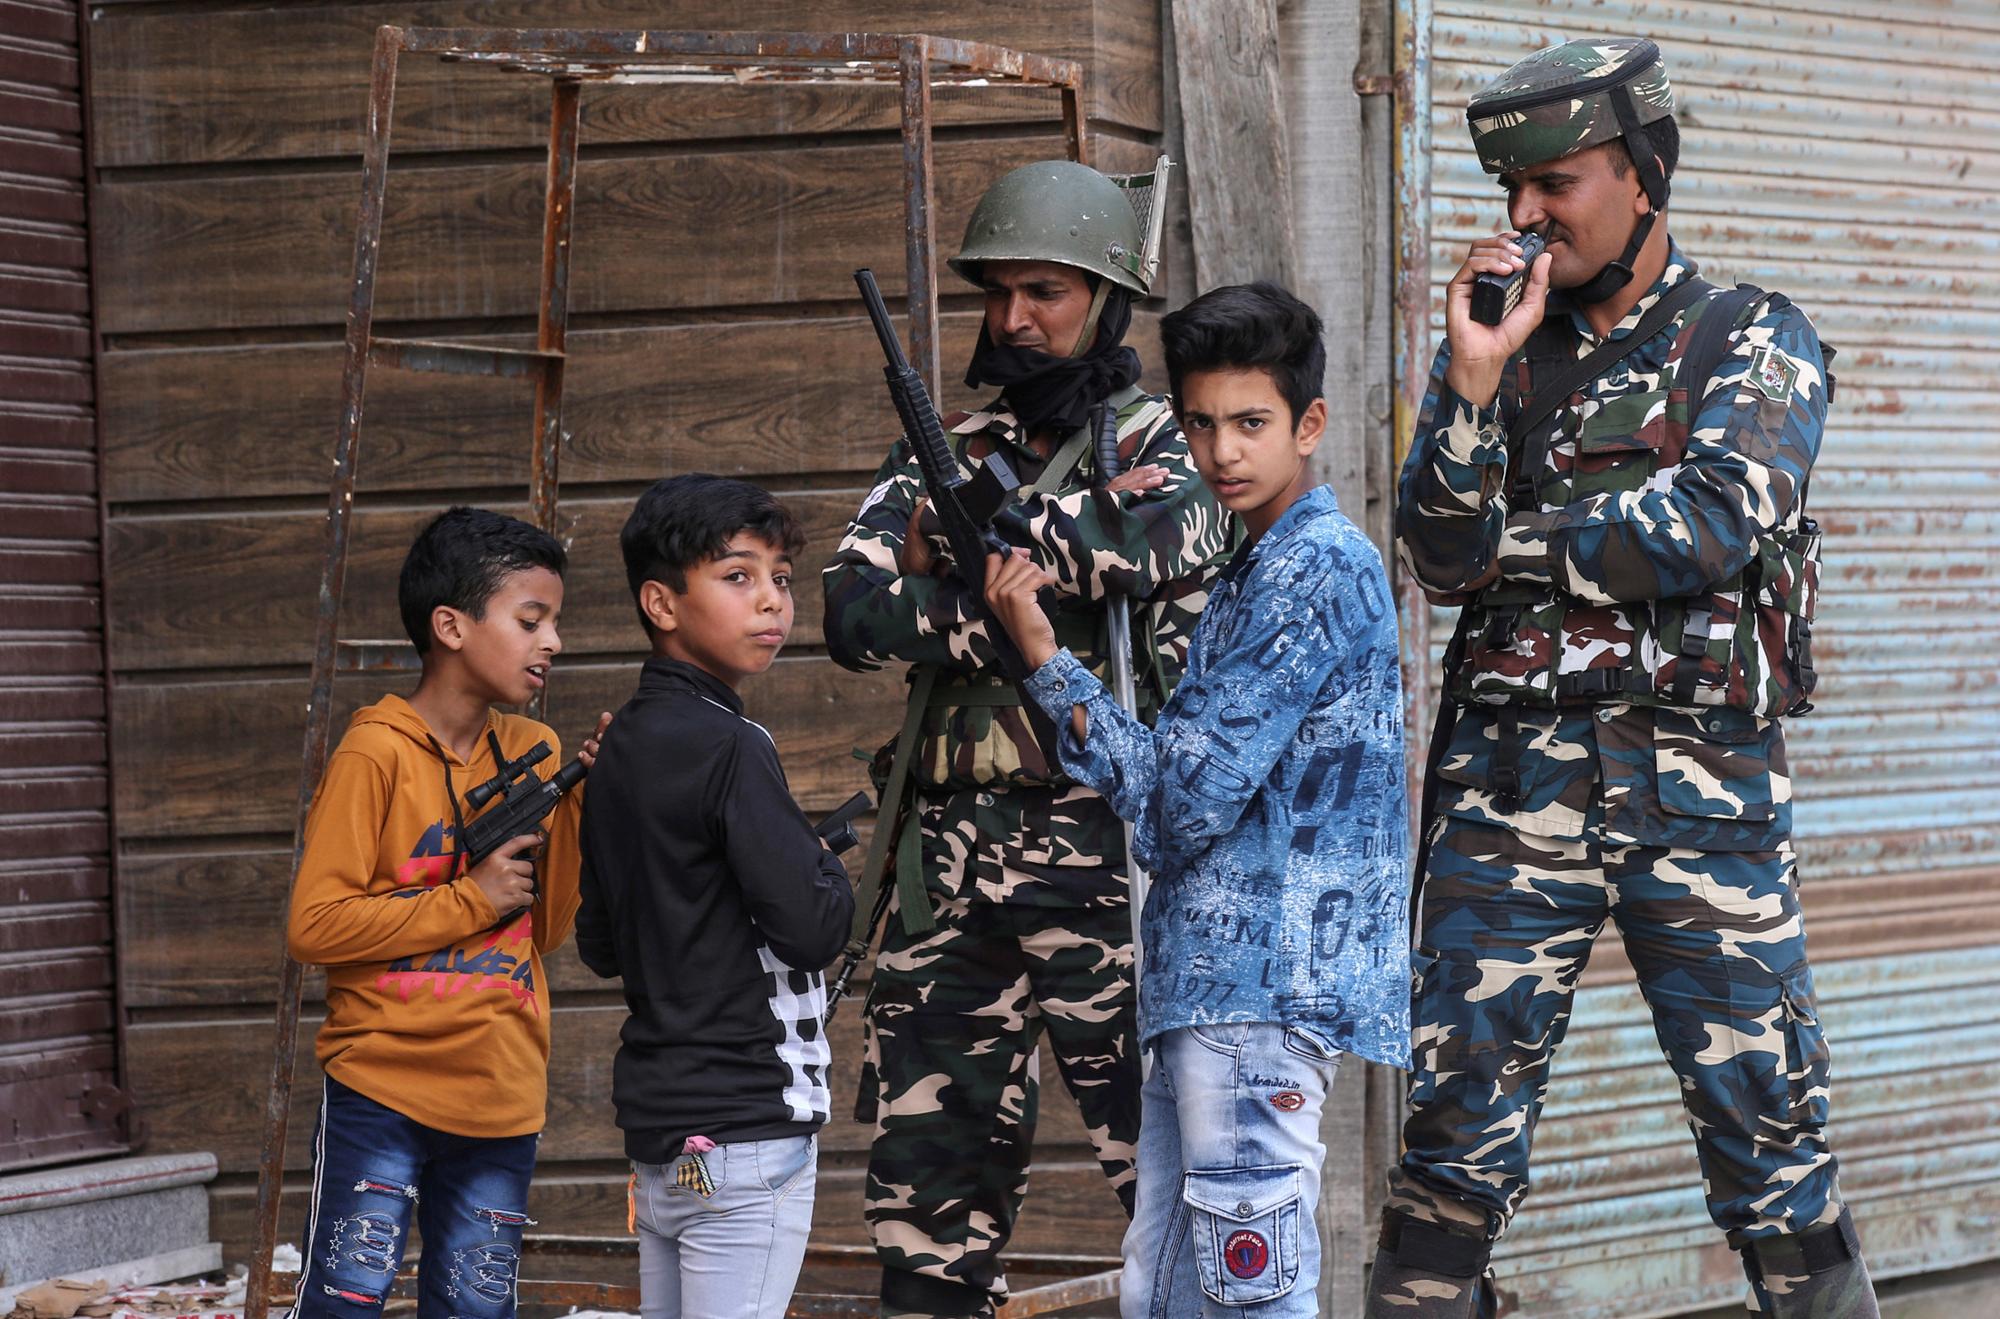 Children play with toy guns next to Indian security force personnel during restrictions after the scrapping of the special constitutional status for Kashmir by the government, in Srinagar, August 13, 2019. REUTERS/Danish Ismail